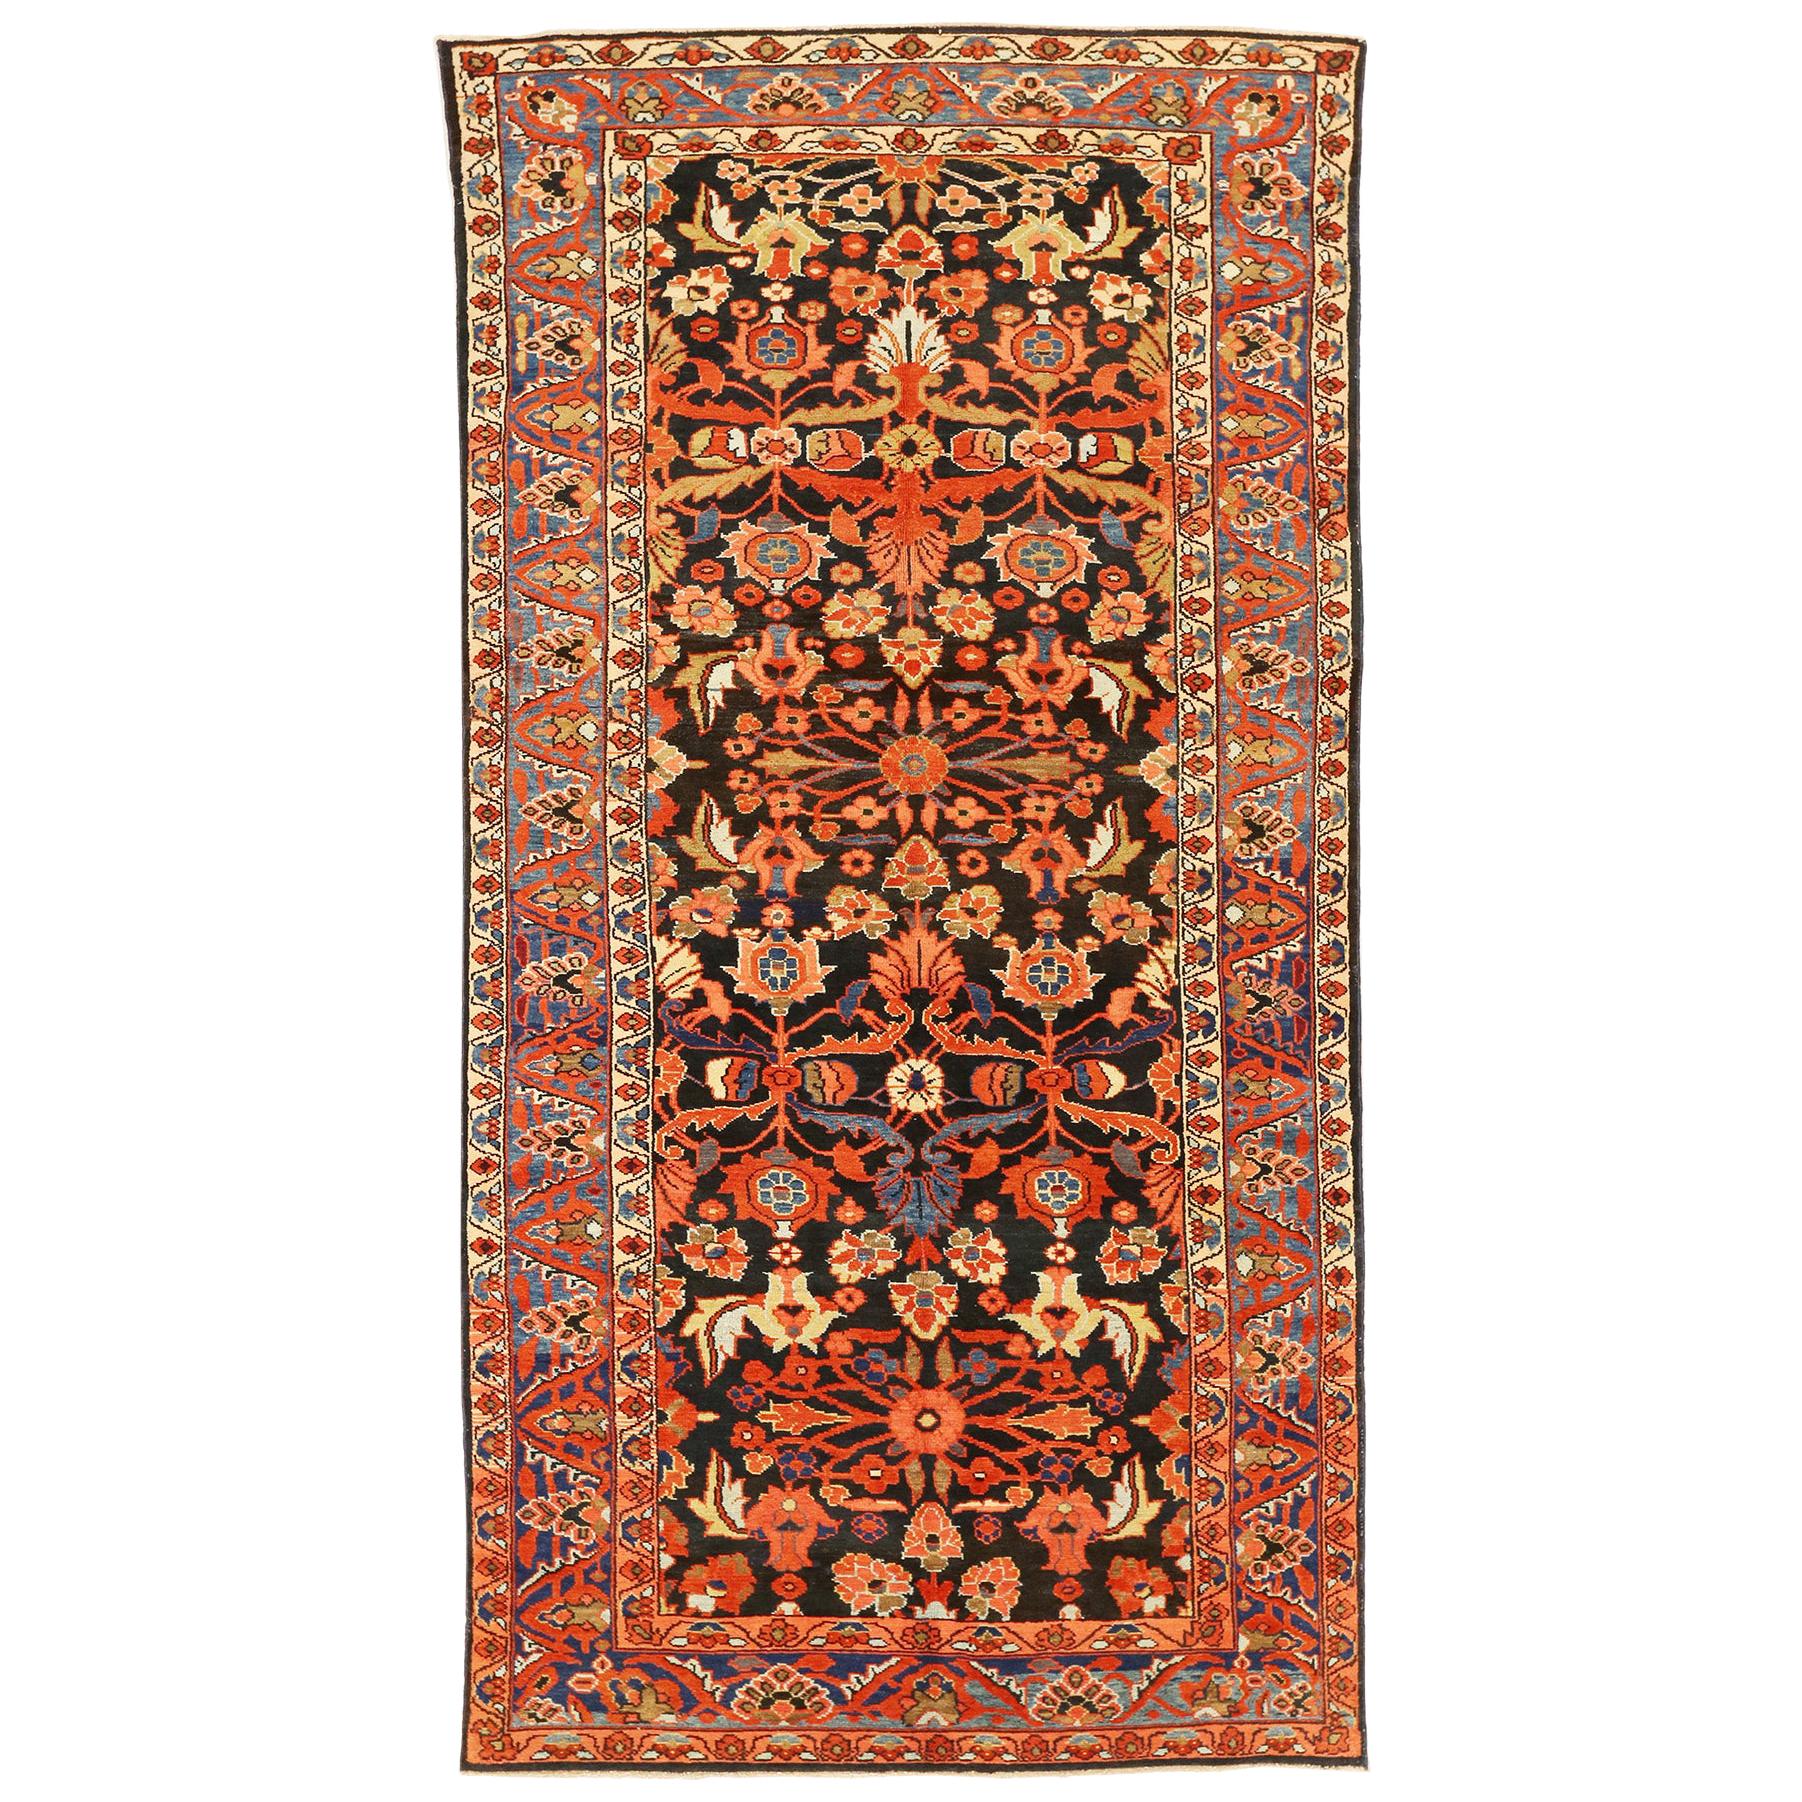 Antique Persian Malayer Rug with Blue and Red Floral Details on Ivory Field